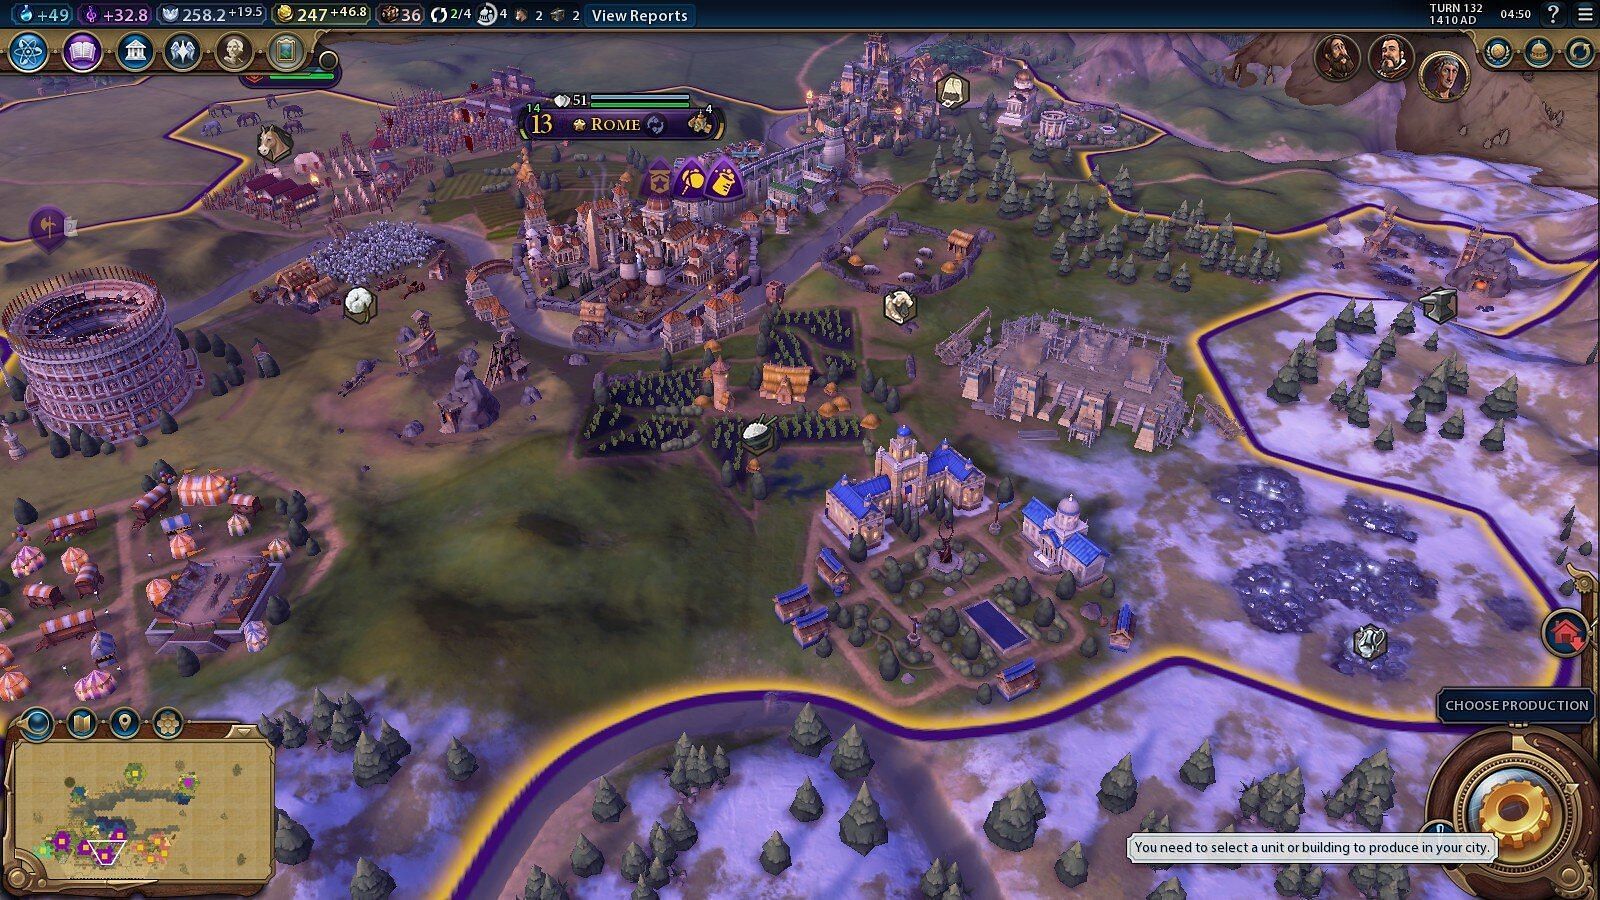 The Campus district has adjacency bonuses when placed next to mountains (Image via Firaxis)